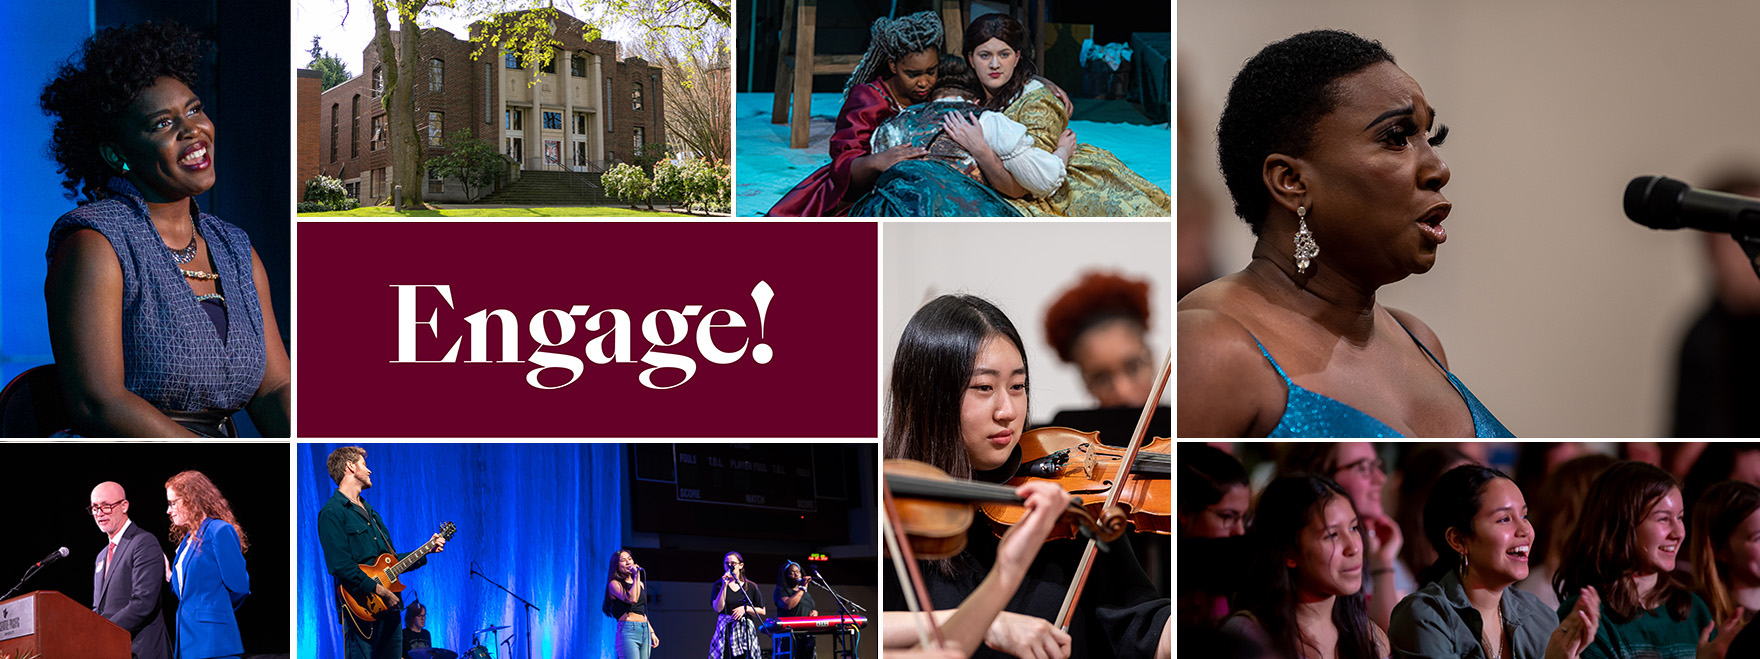 Collage of events on campus with "Engage!" on a maroon background